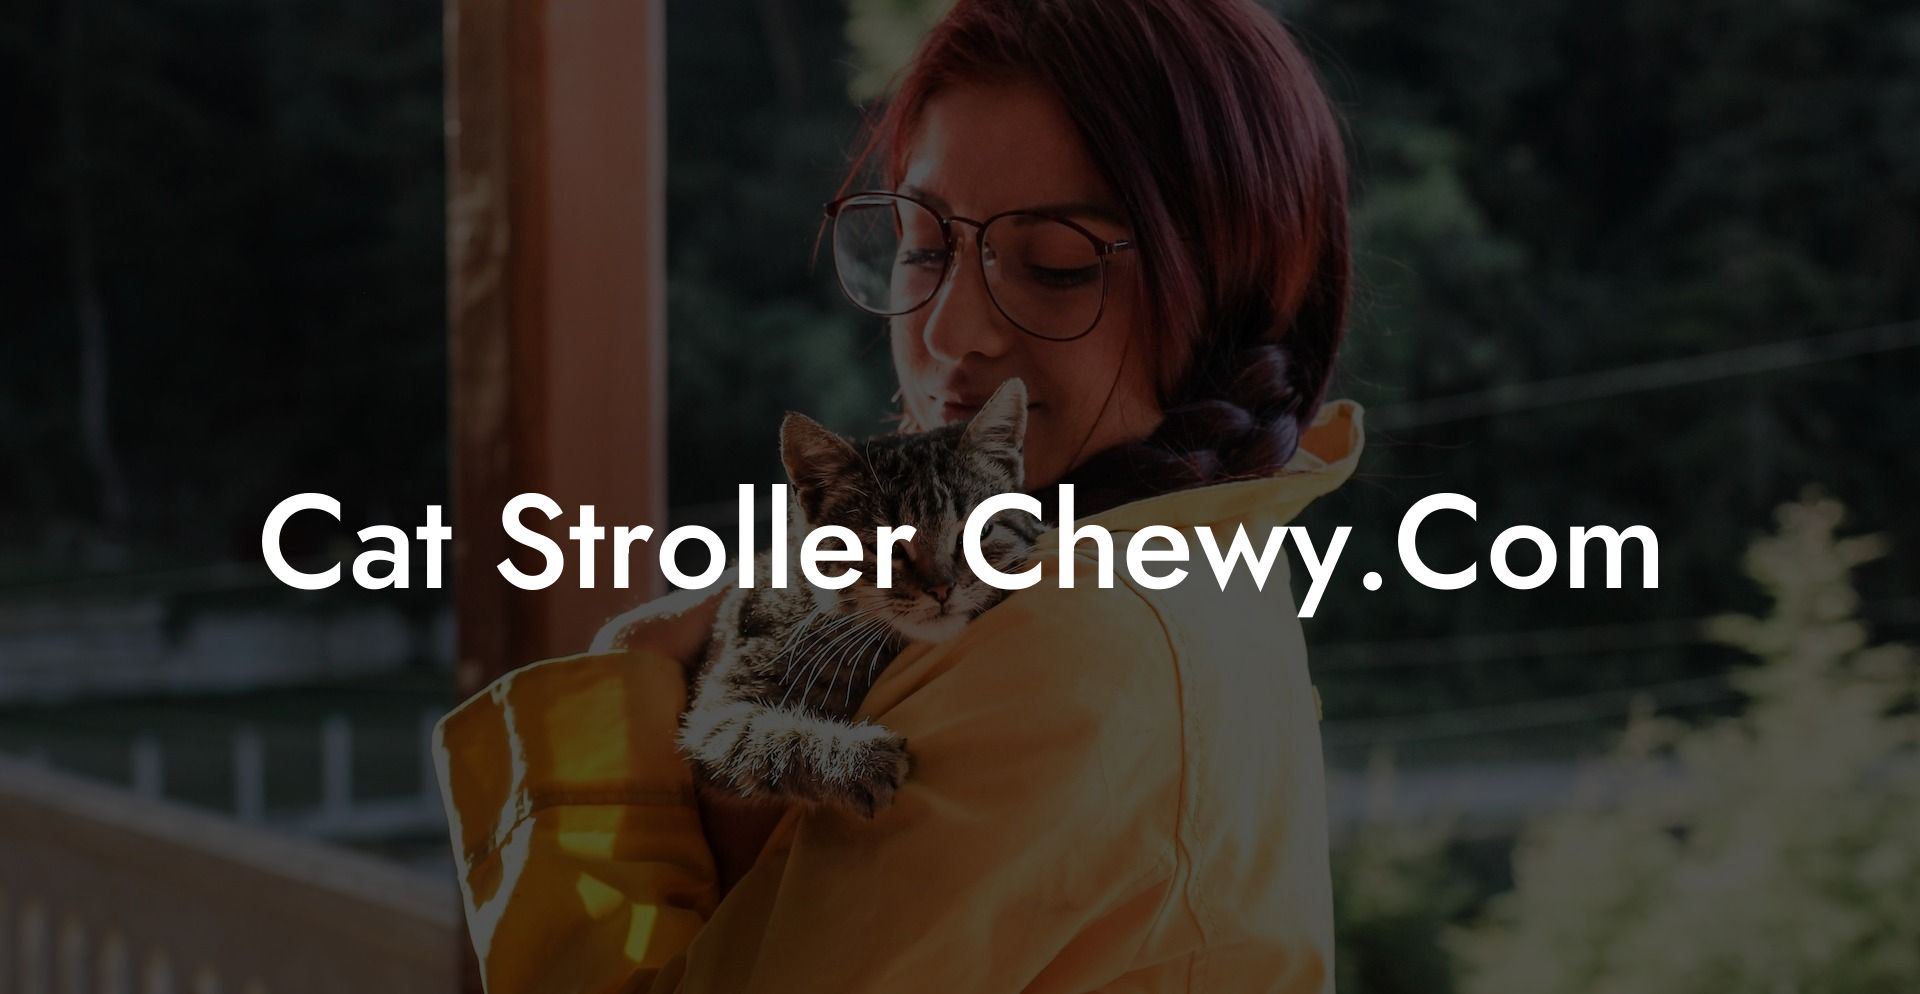 Cat Stroller Chewy.Com